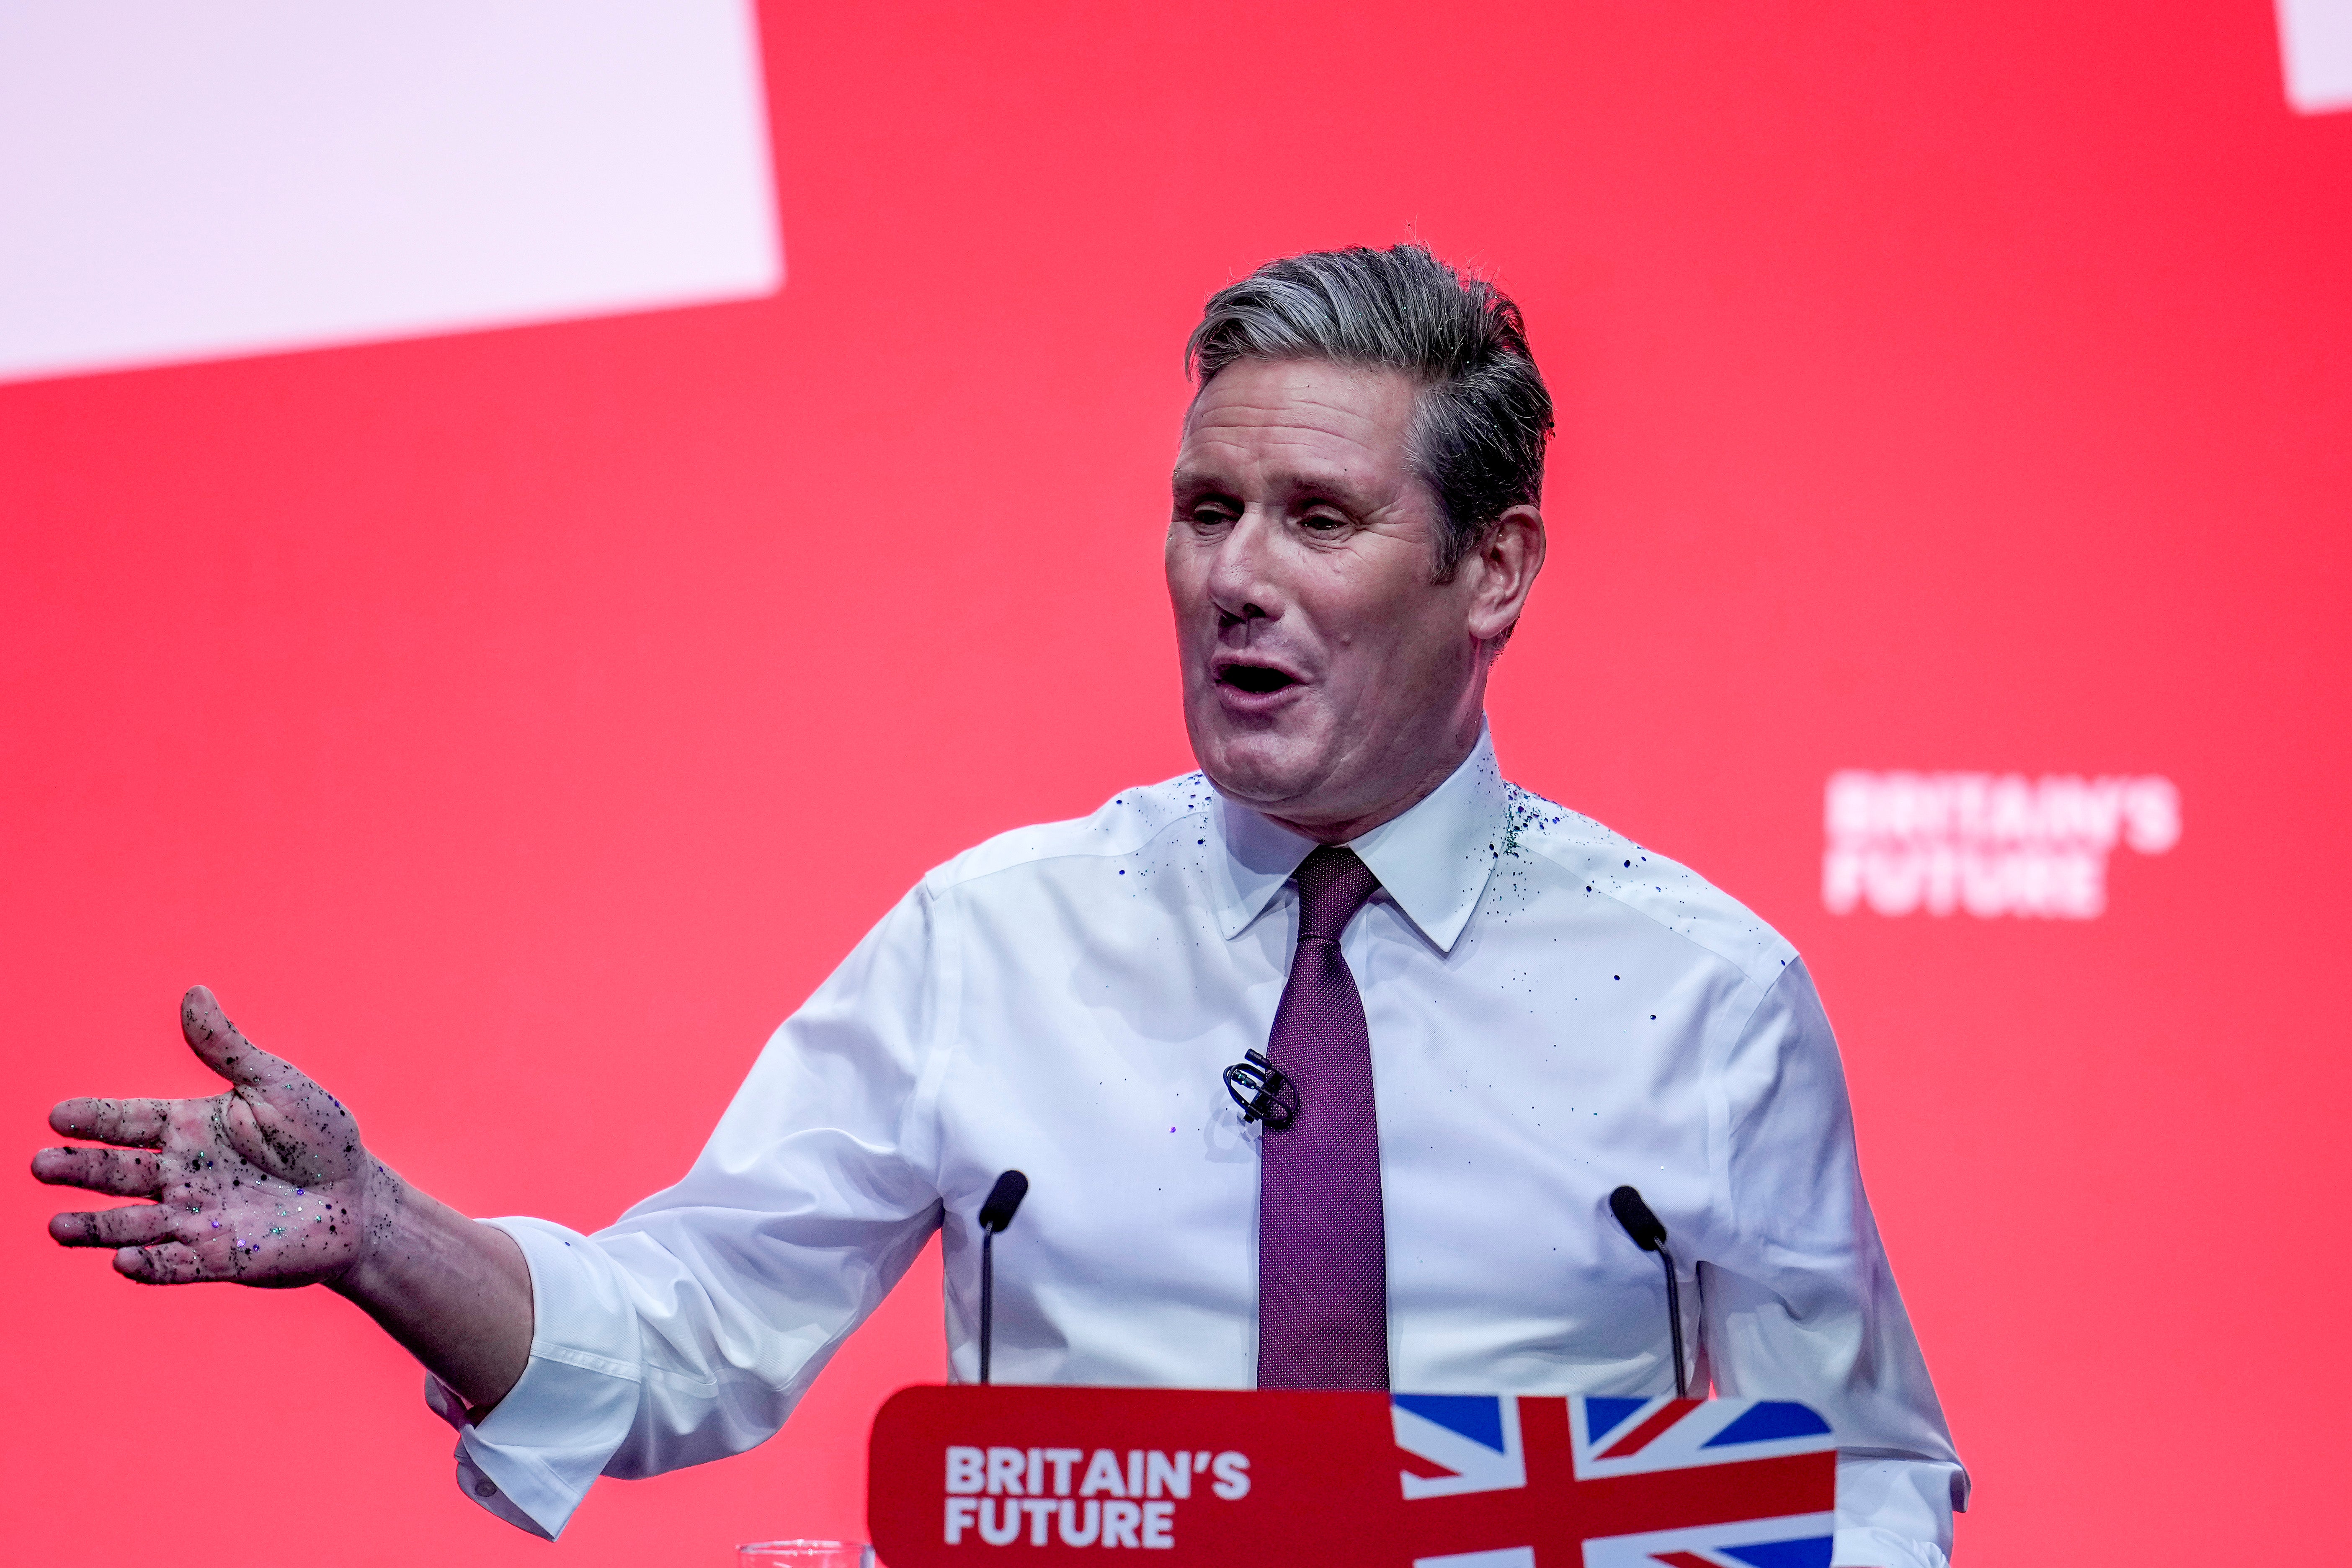 Sir Keir Starmer’s has said a Labour government would seek returns agreement with the EU